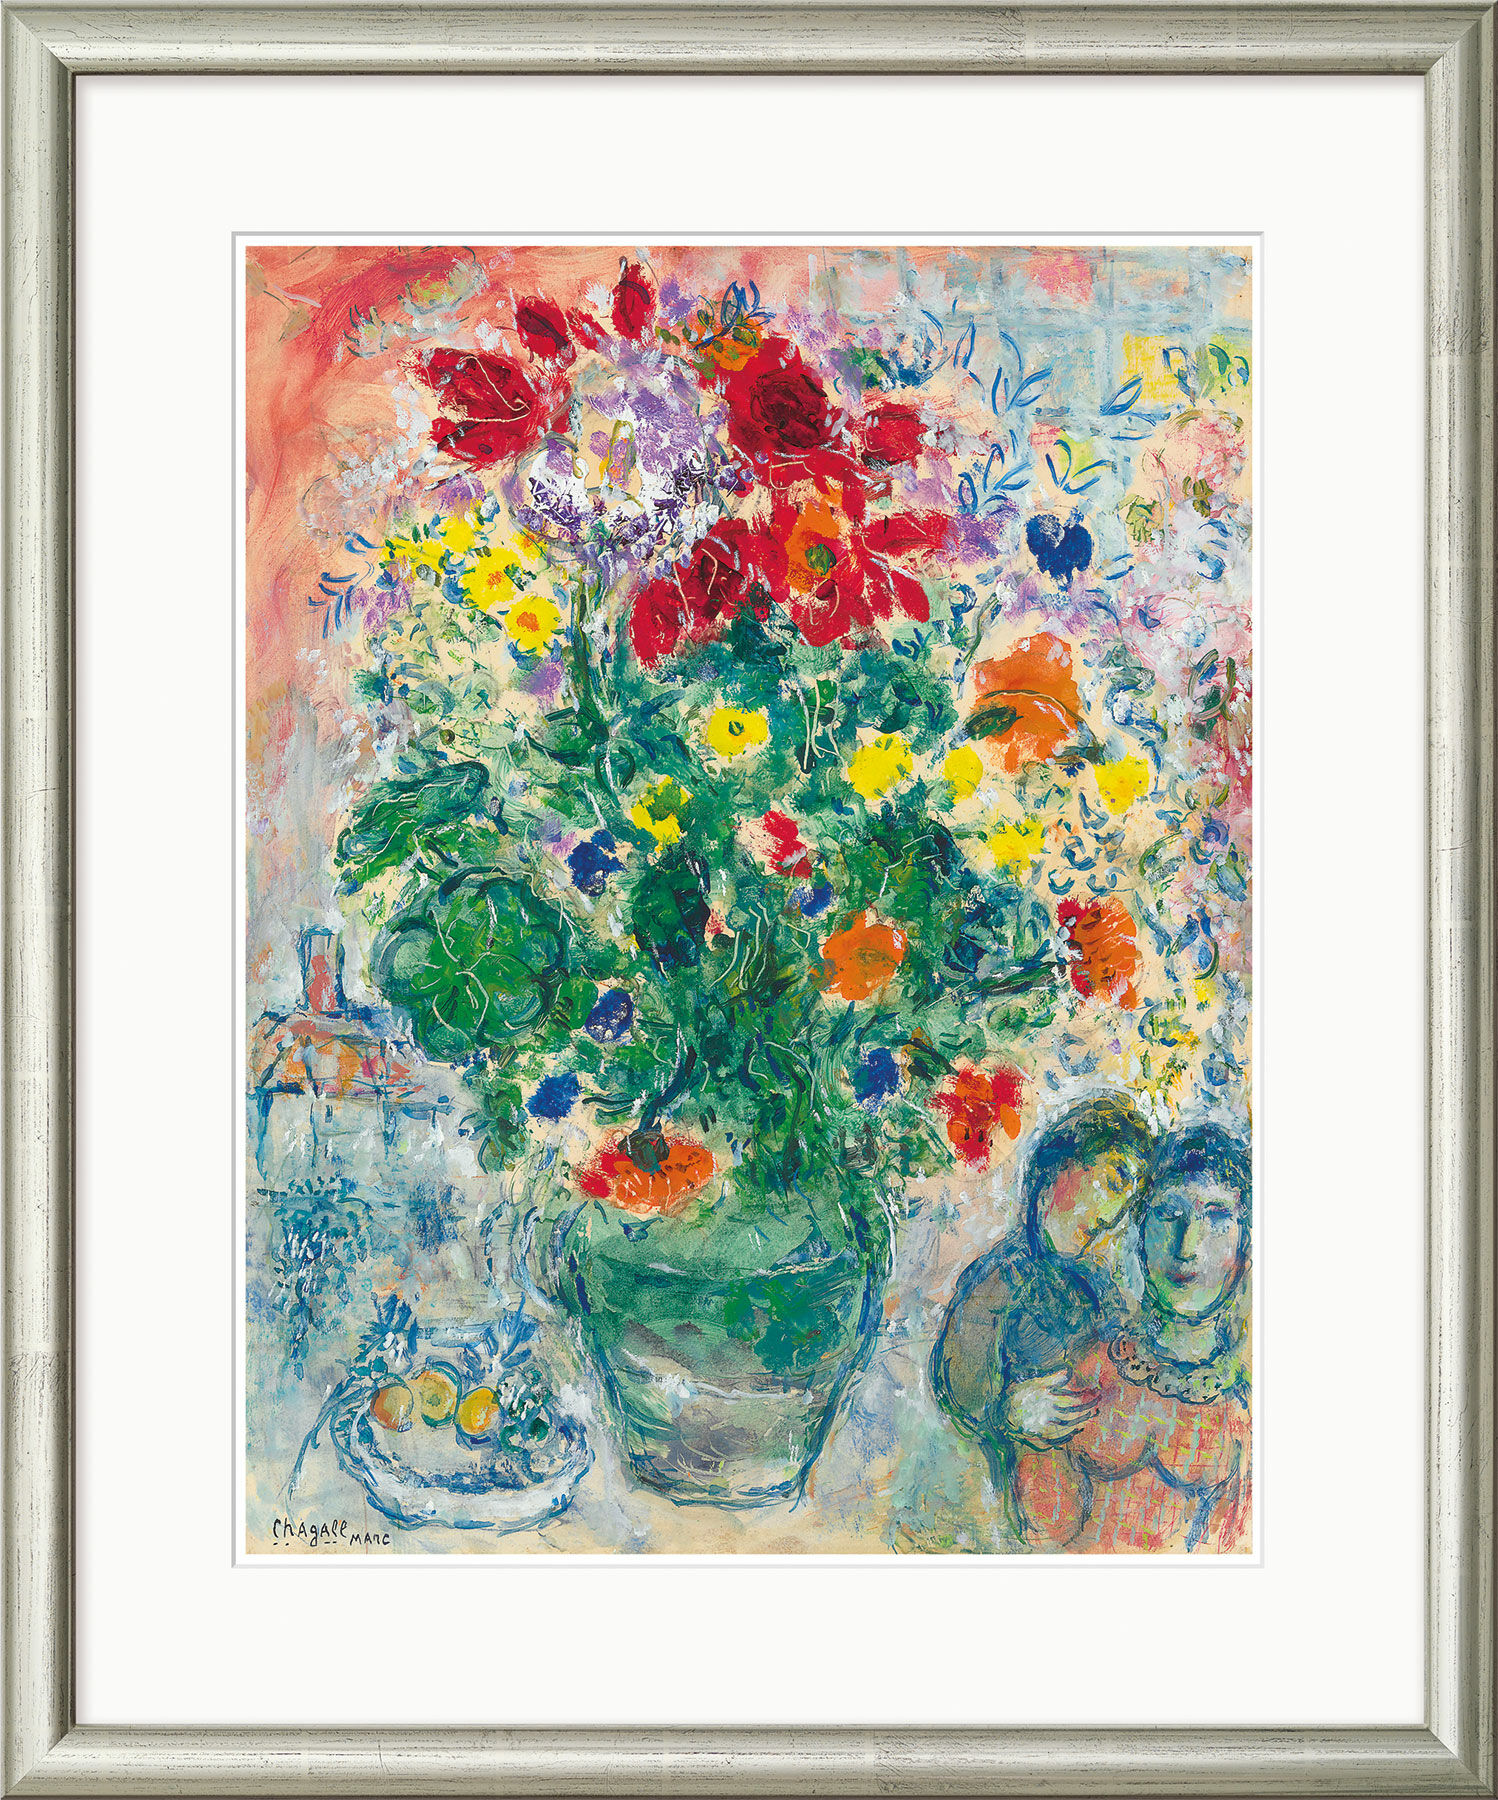 Picture "Bouquet de Renoncules" (1968), silver-coloured framed version by Marc Chagall